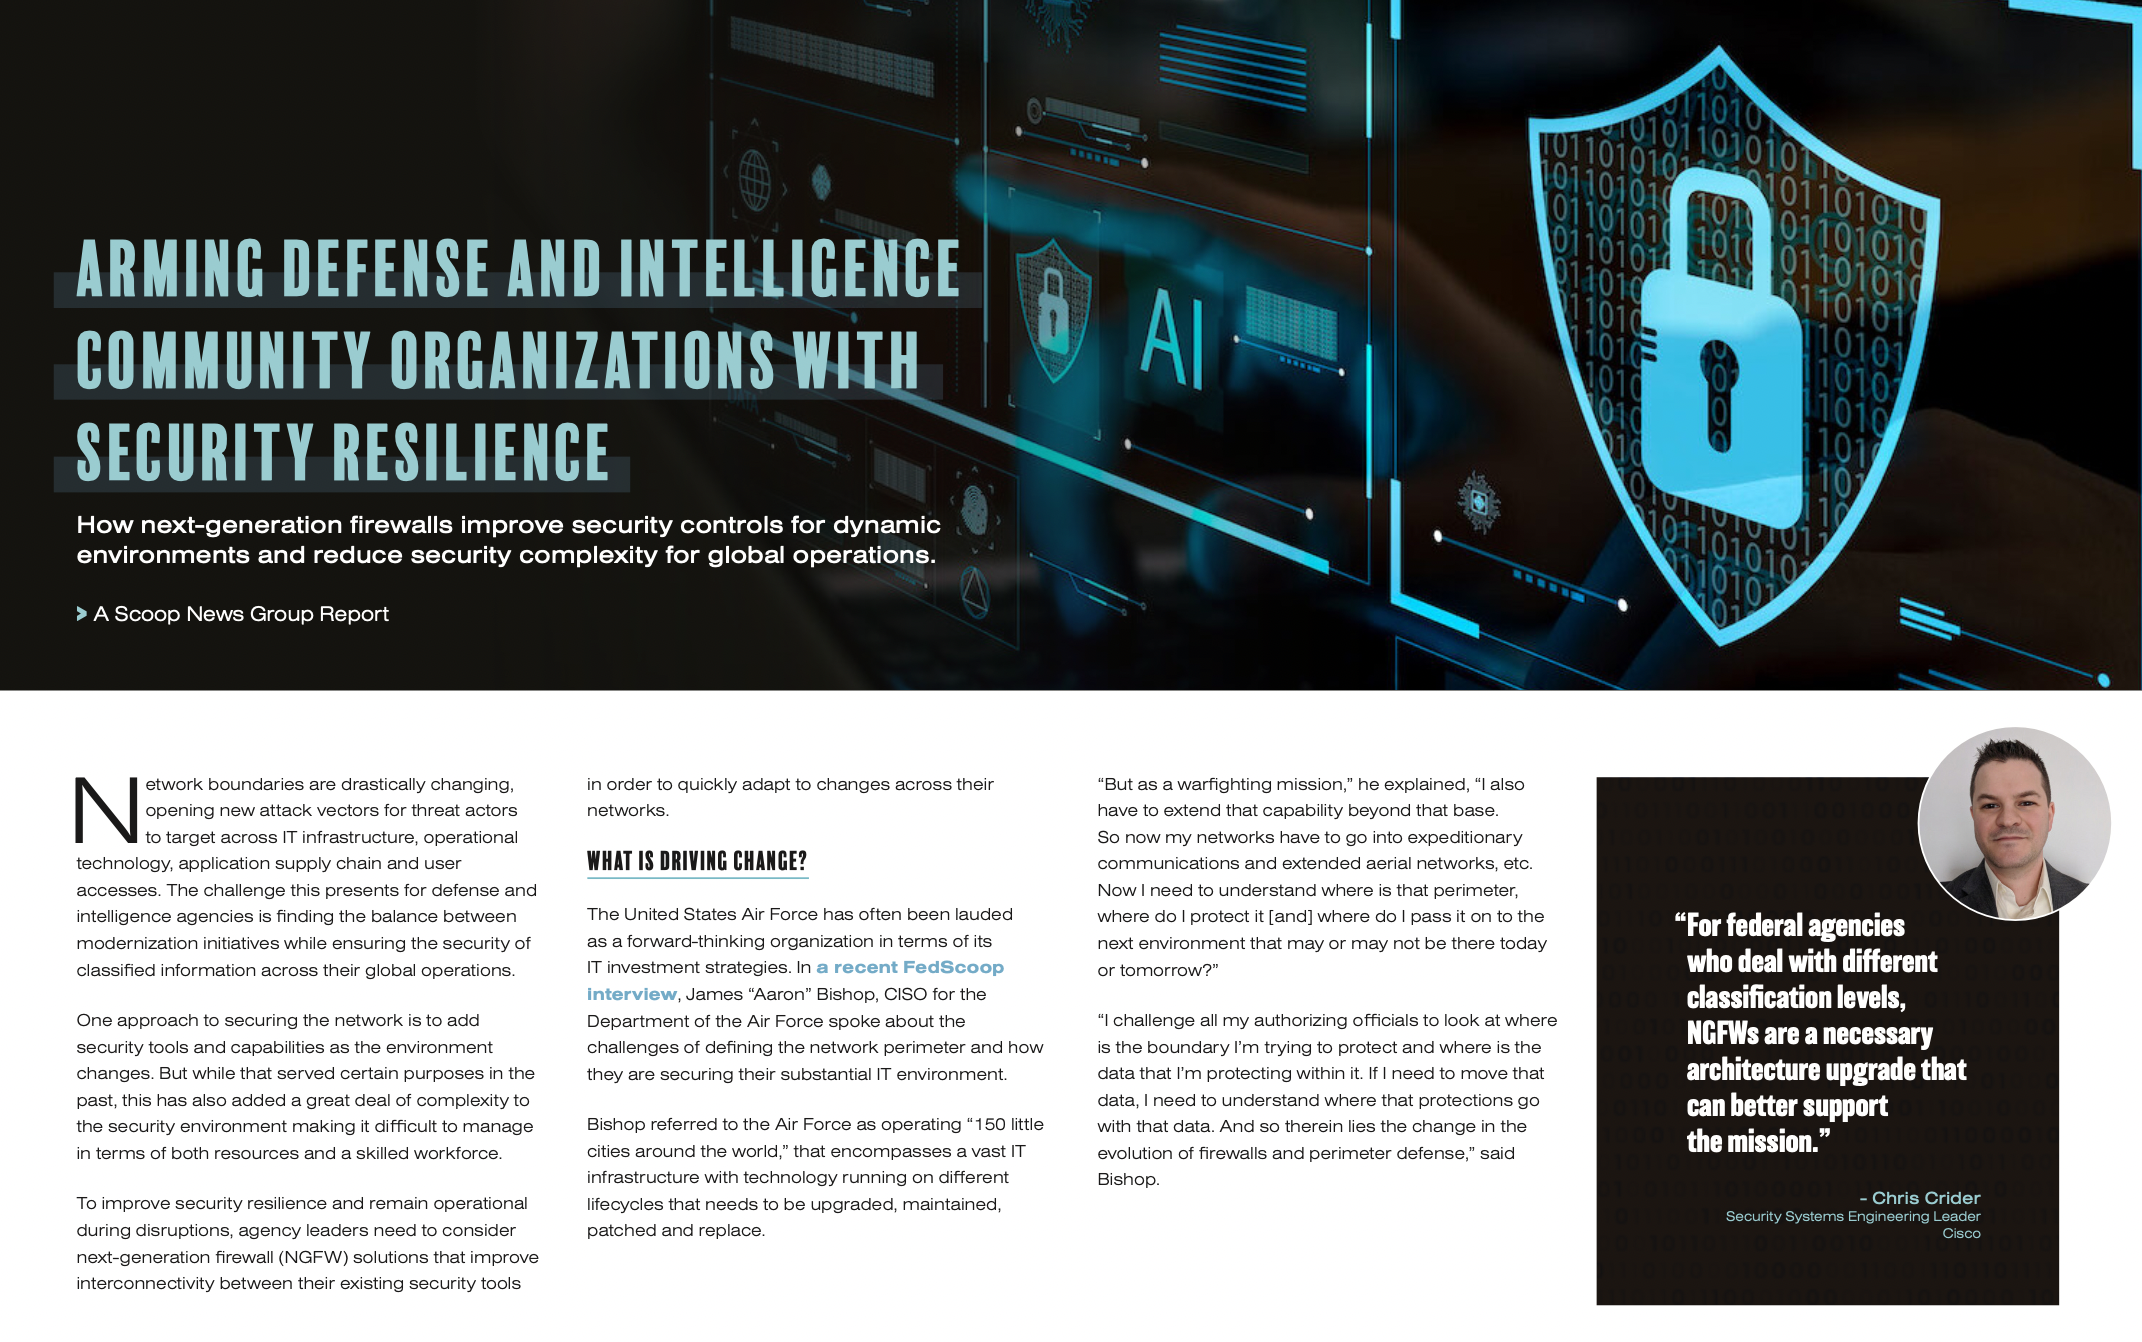 Arming Defense and Intelligence Community Organizations with Security Resilience